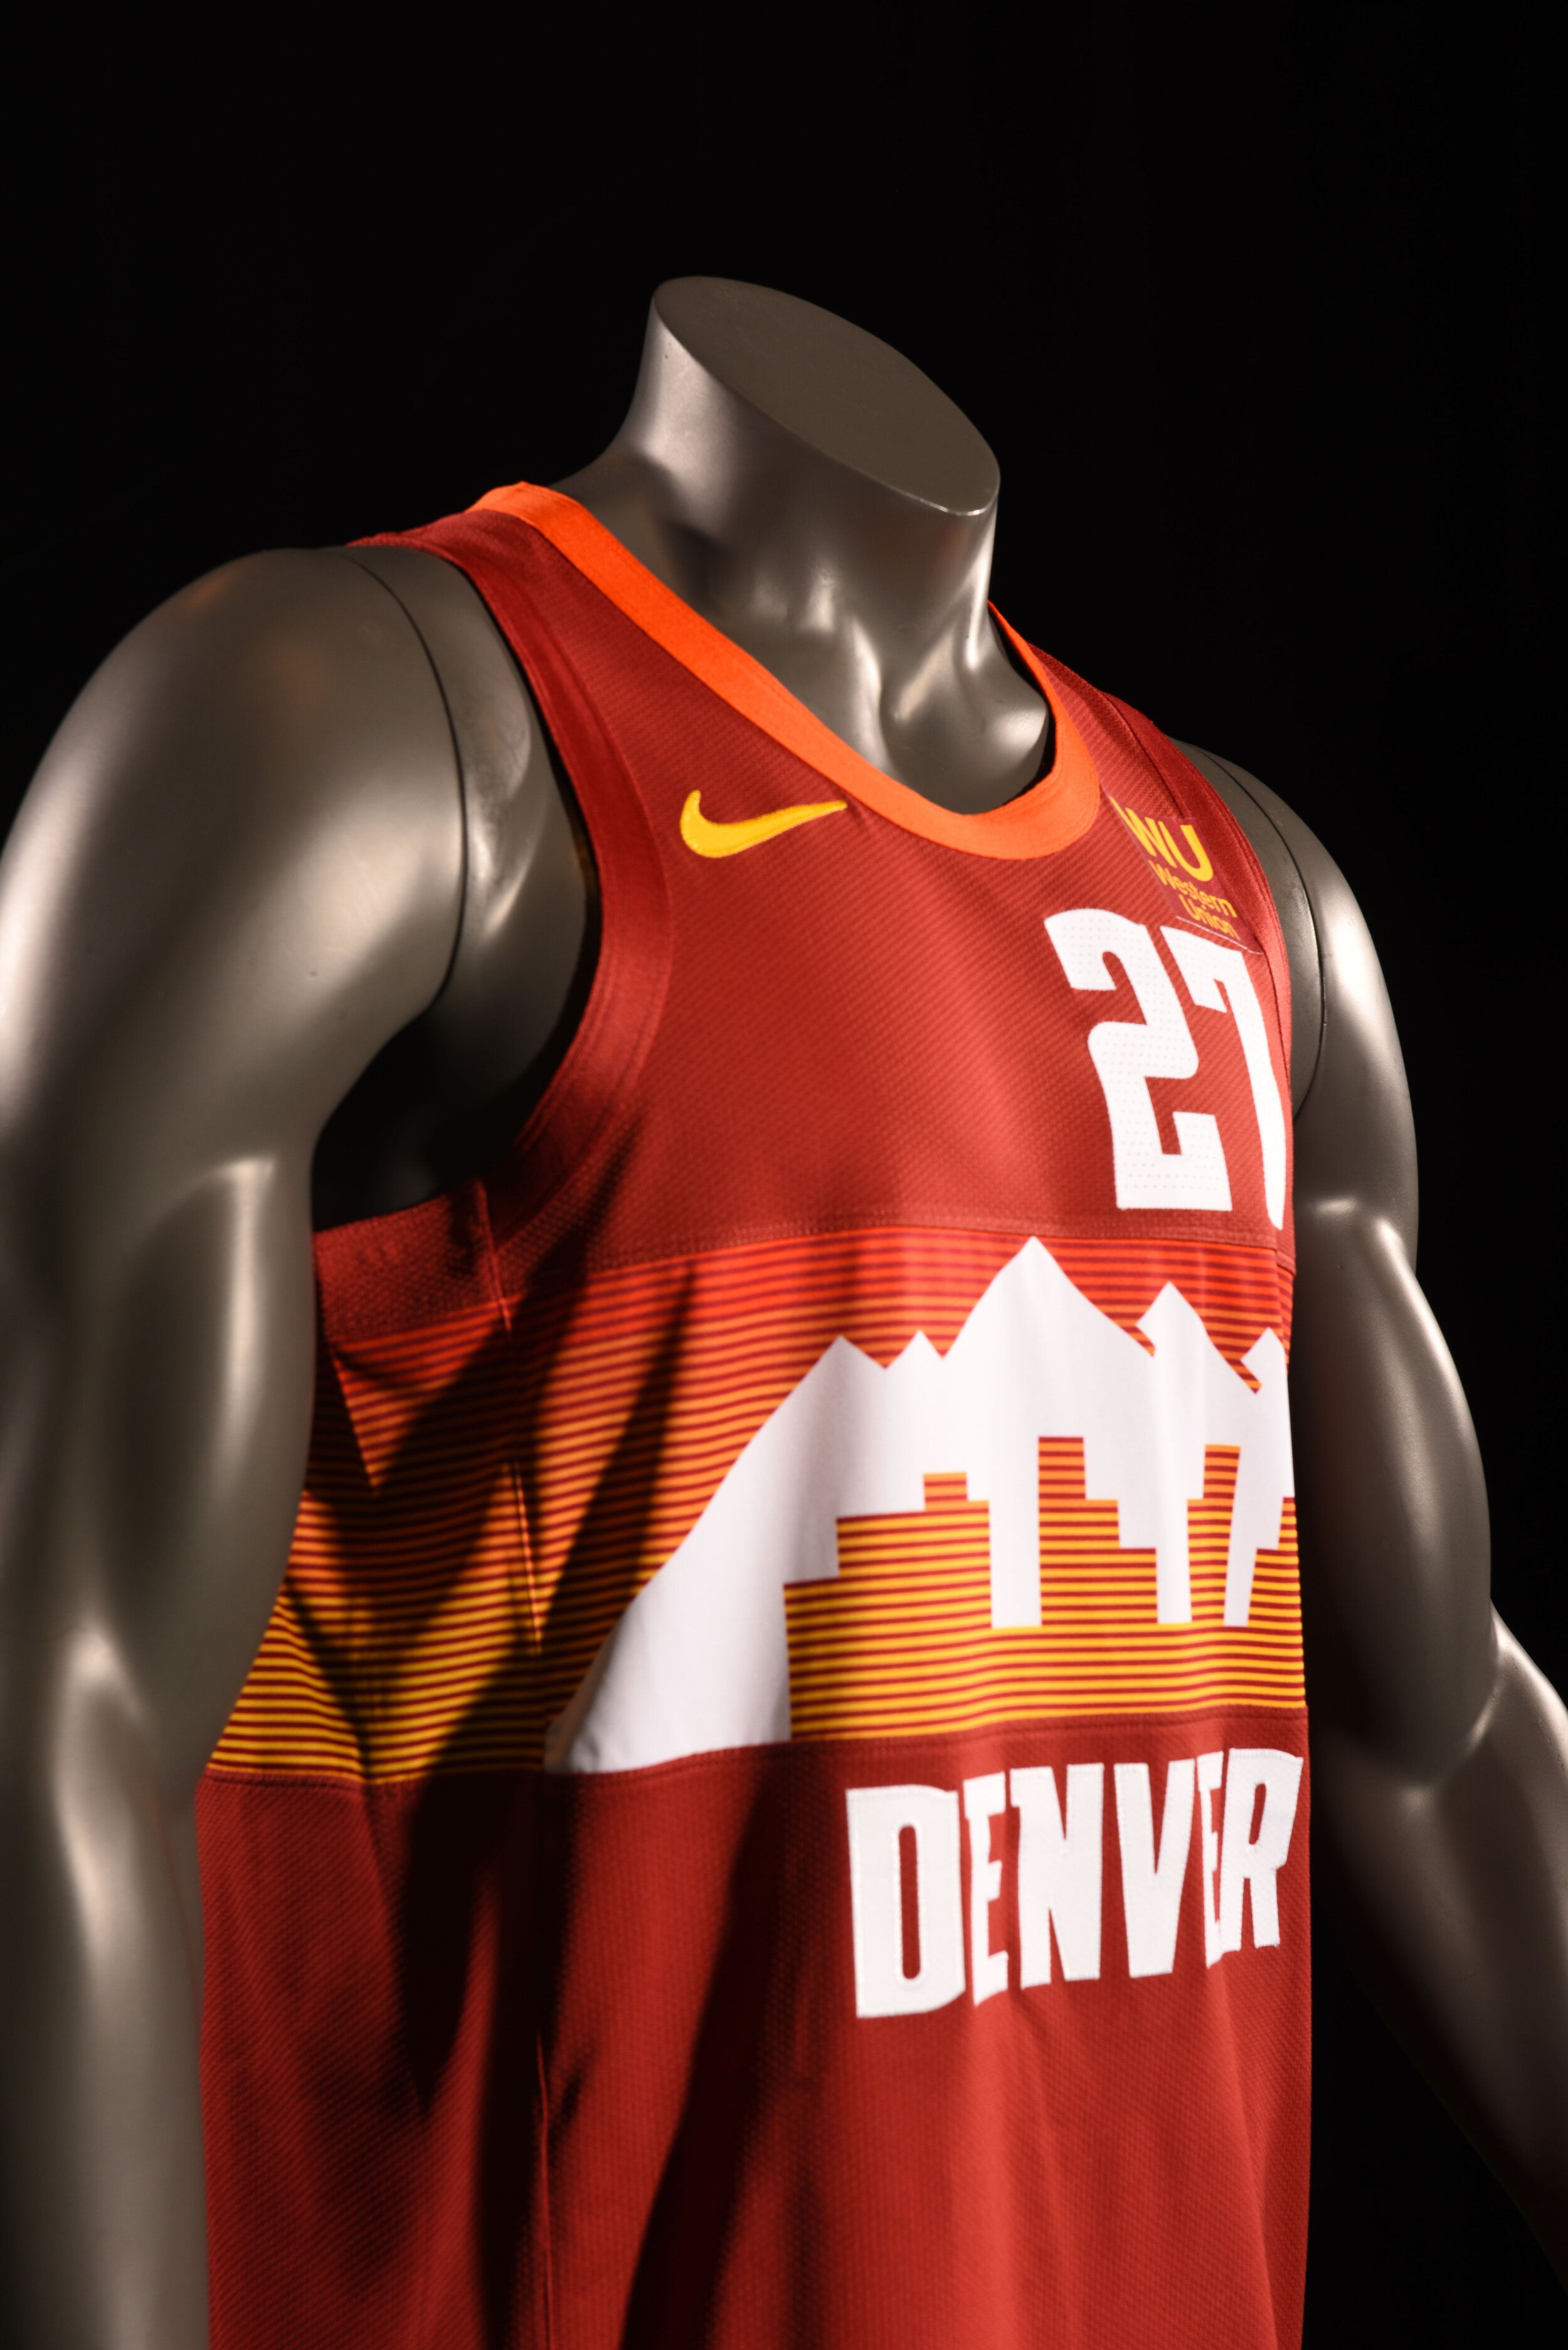 nuggets jersey city edition